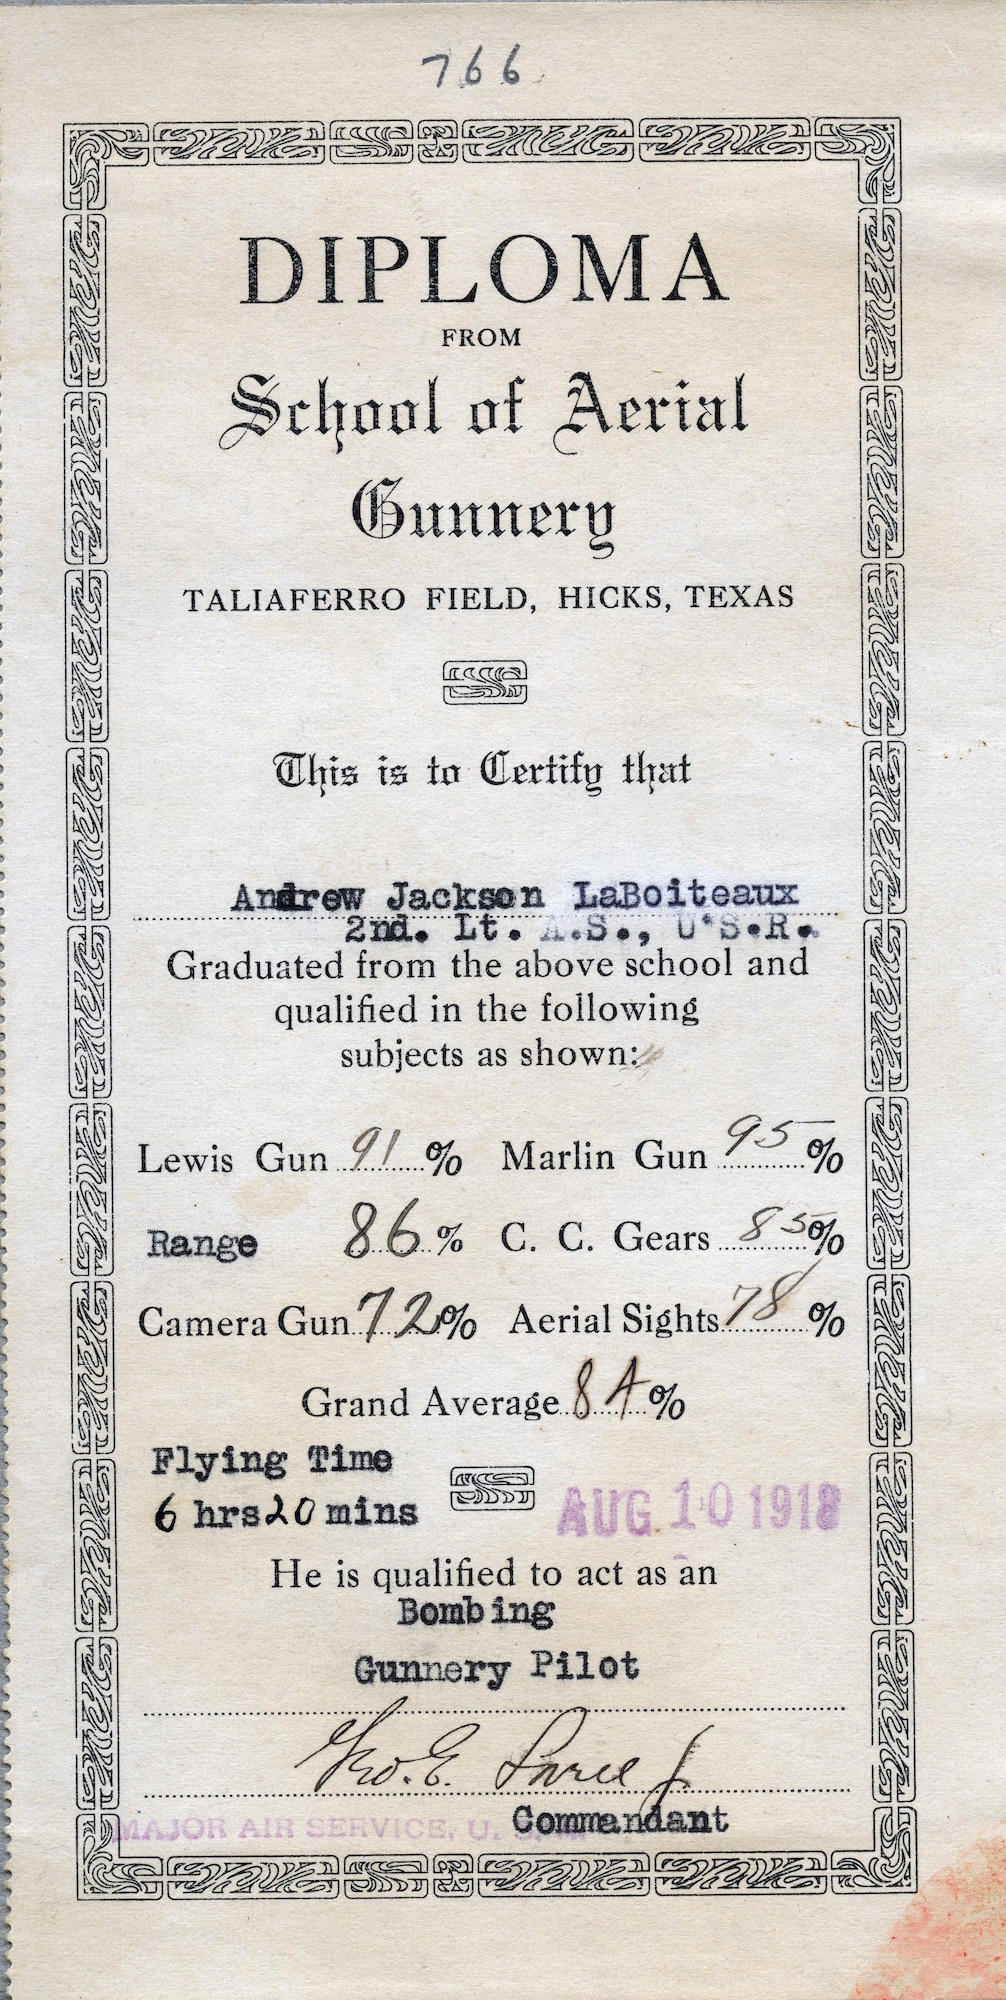 Besides learning to fly an aircraft, Signal Corps pilots were required to train on aerial gunnery. Before leaving for the front, Lieutenant Andrew J. LaBoiteaux completed his aerial gunnery training at Taliaferro Field, near Fort Worth, Texas.  According to his diploma, dated August 10, 1918, LaBoiteaux qualified as a bombing gunnery pilot, earning a grand average of 84%. 